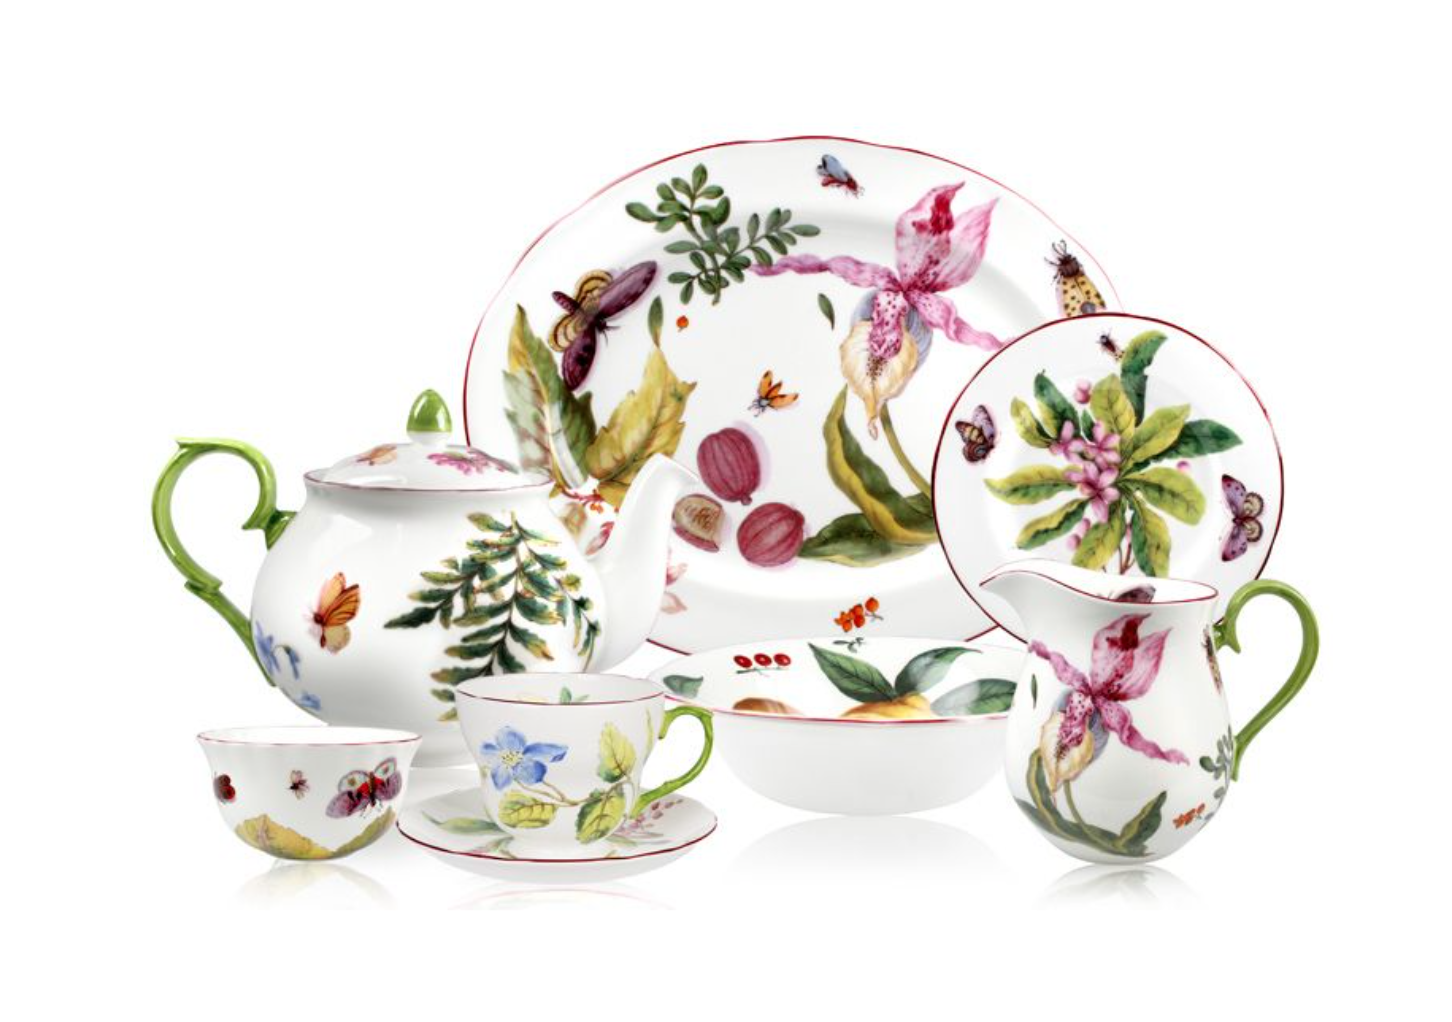 Royal Collection Chelsea Porcelain - CLICK HERE TO SHOP